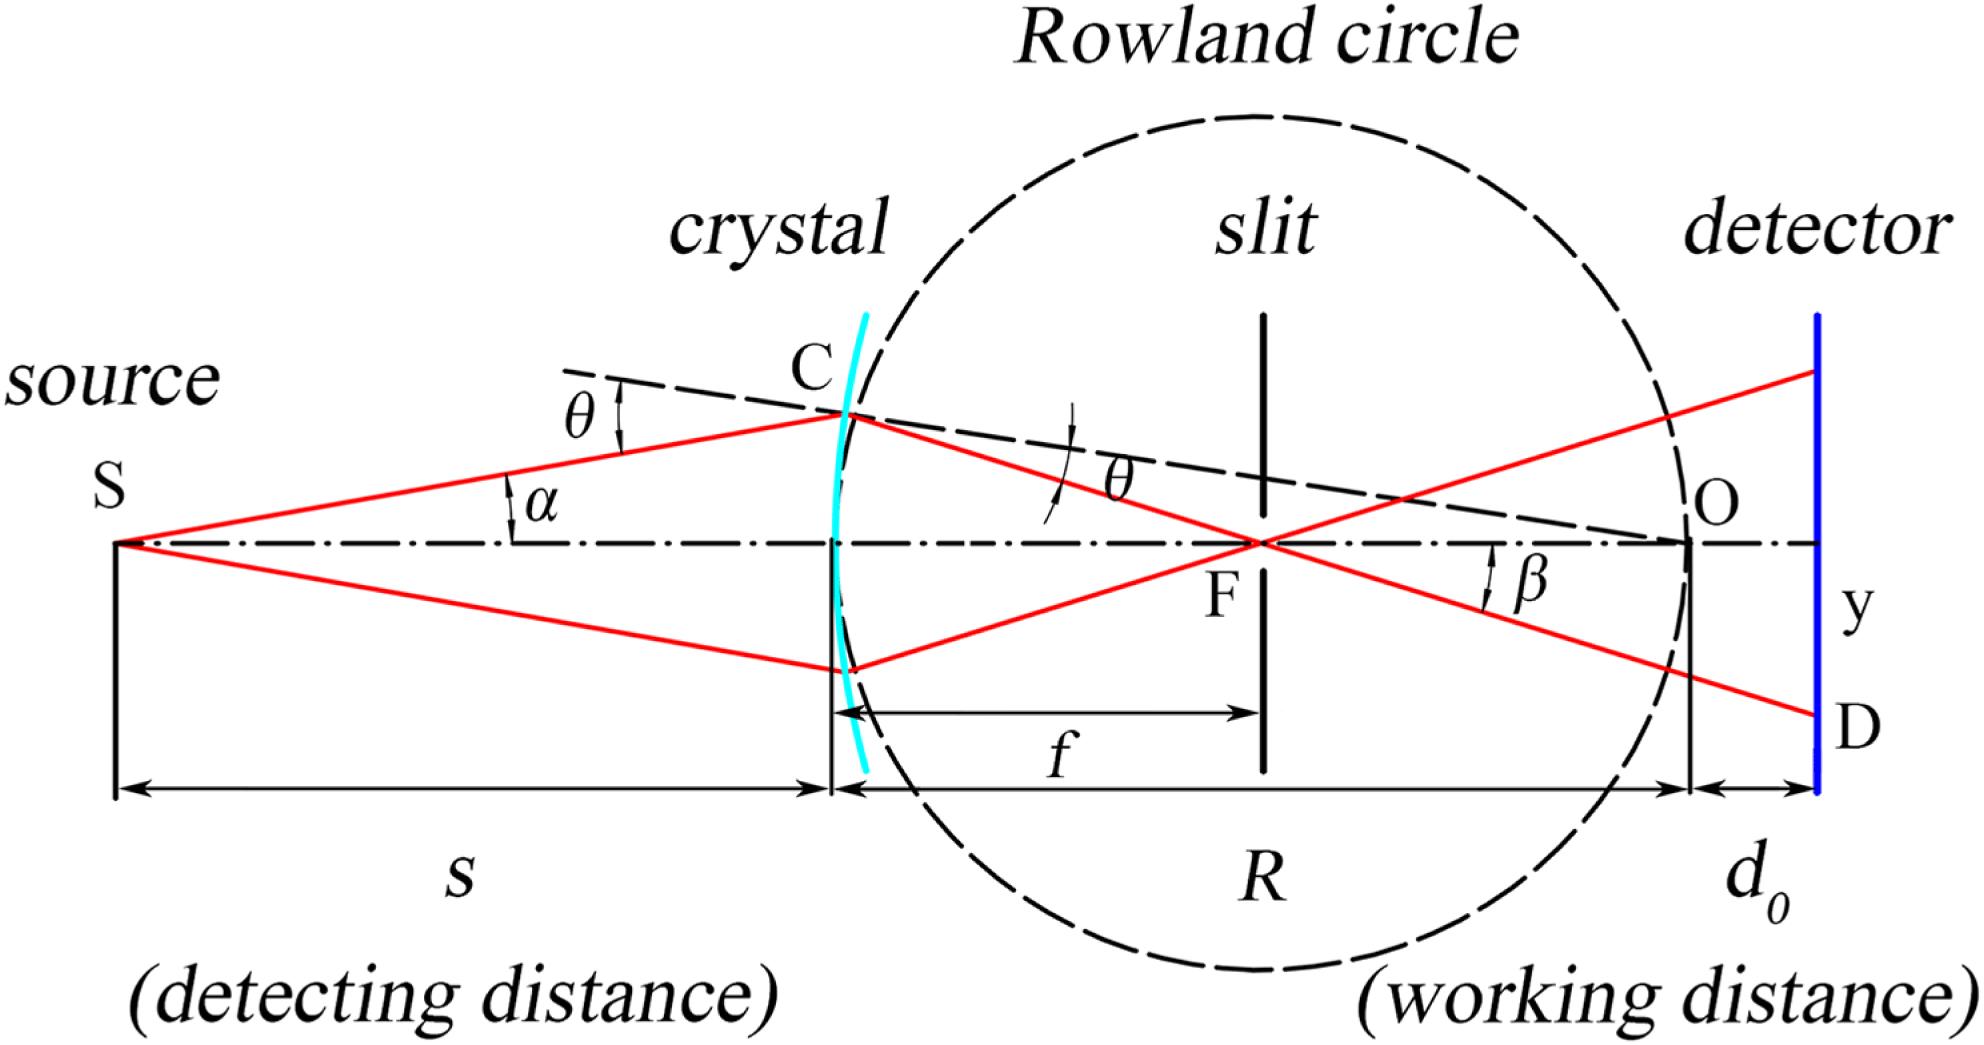 Cauchois-geometry optics of a symmetry transmission cylindrical curved crystal.